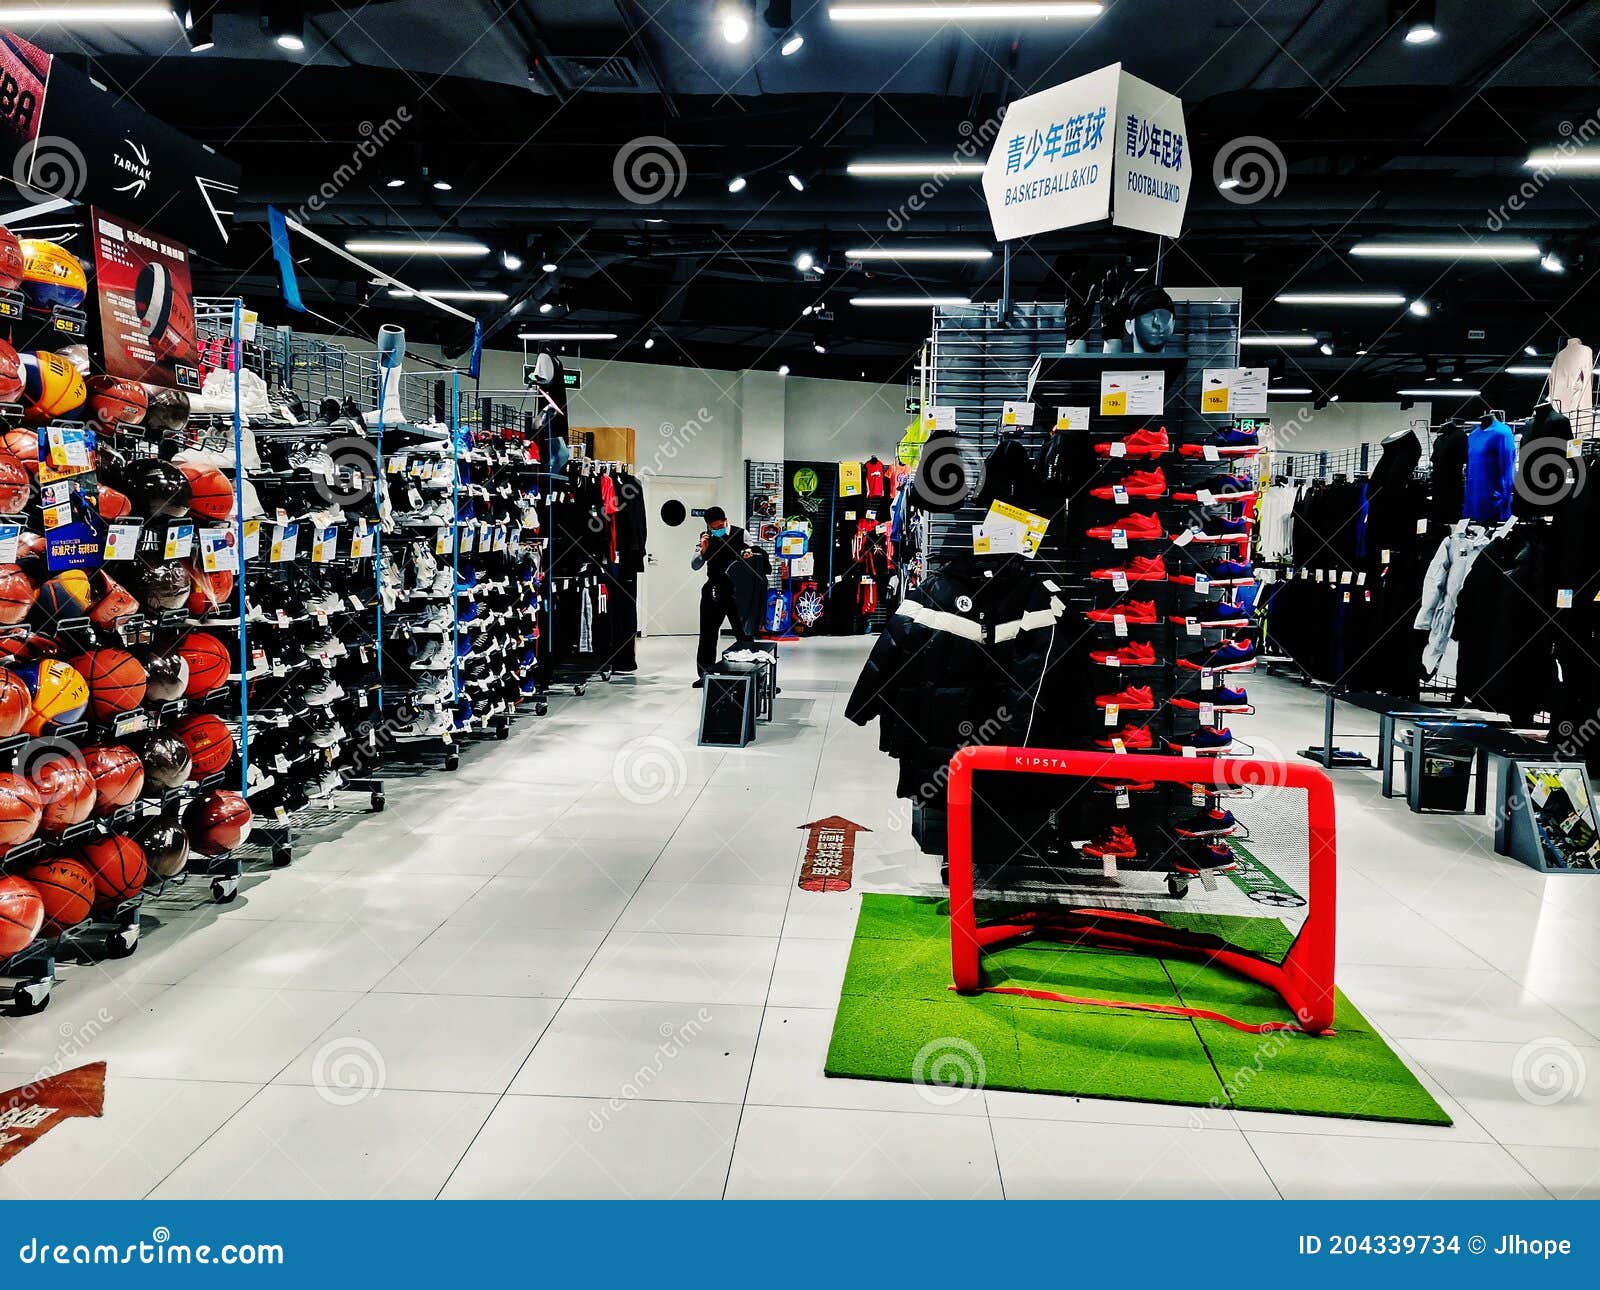 Decathlon Sport Store in Wuhan City Editorial Stock Image - Image of ...